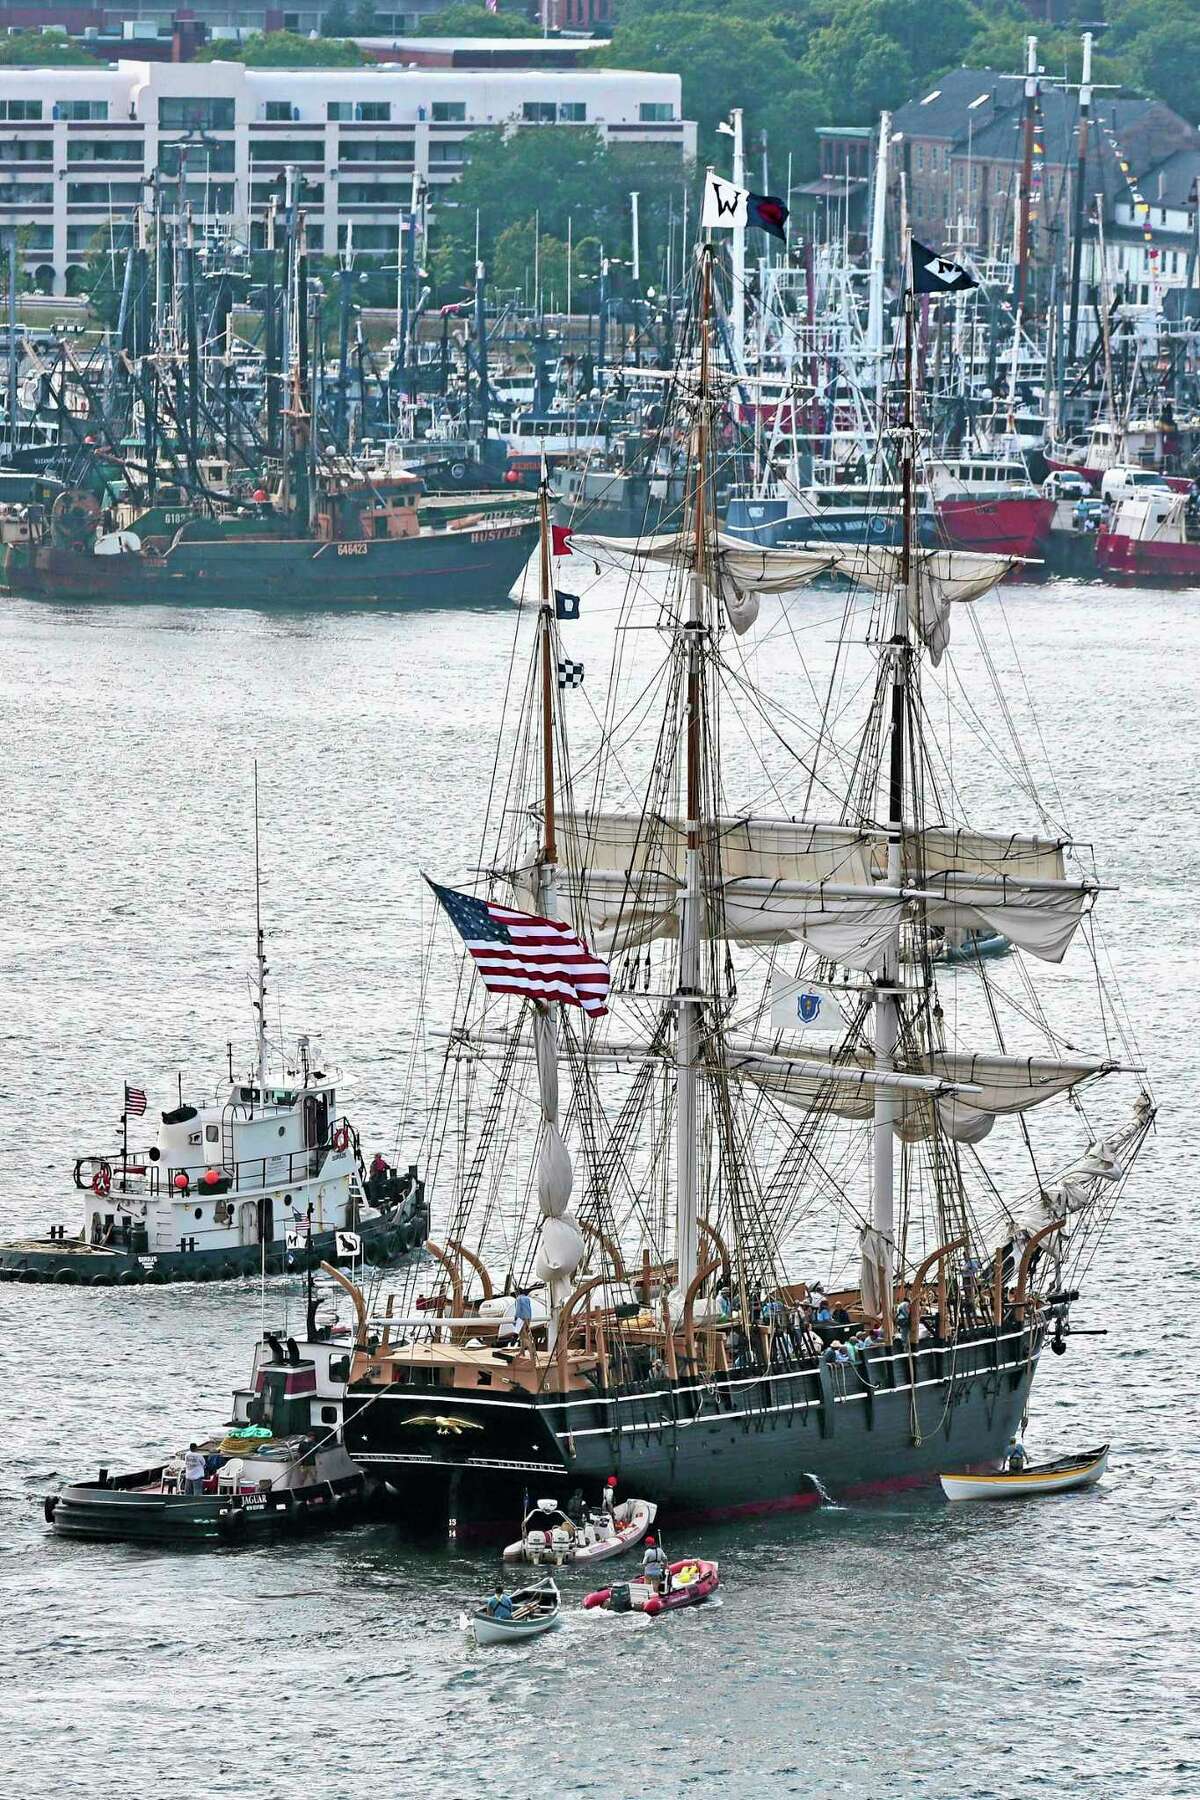 The whaleship Charles W. Morgan approaches its berth in New Bedford, Mass., Wednesday June 25, 2014. The Charles W. Morgan is the last surviving ship from America's 19th century whaling fleet and is three-month journey along the southern New England coast.(AP Photo/Standard Times, Peter Pereira)